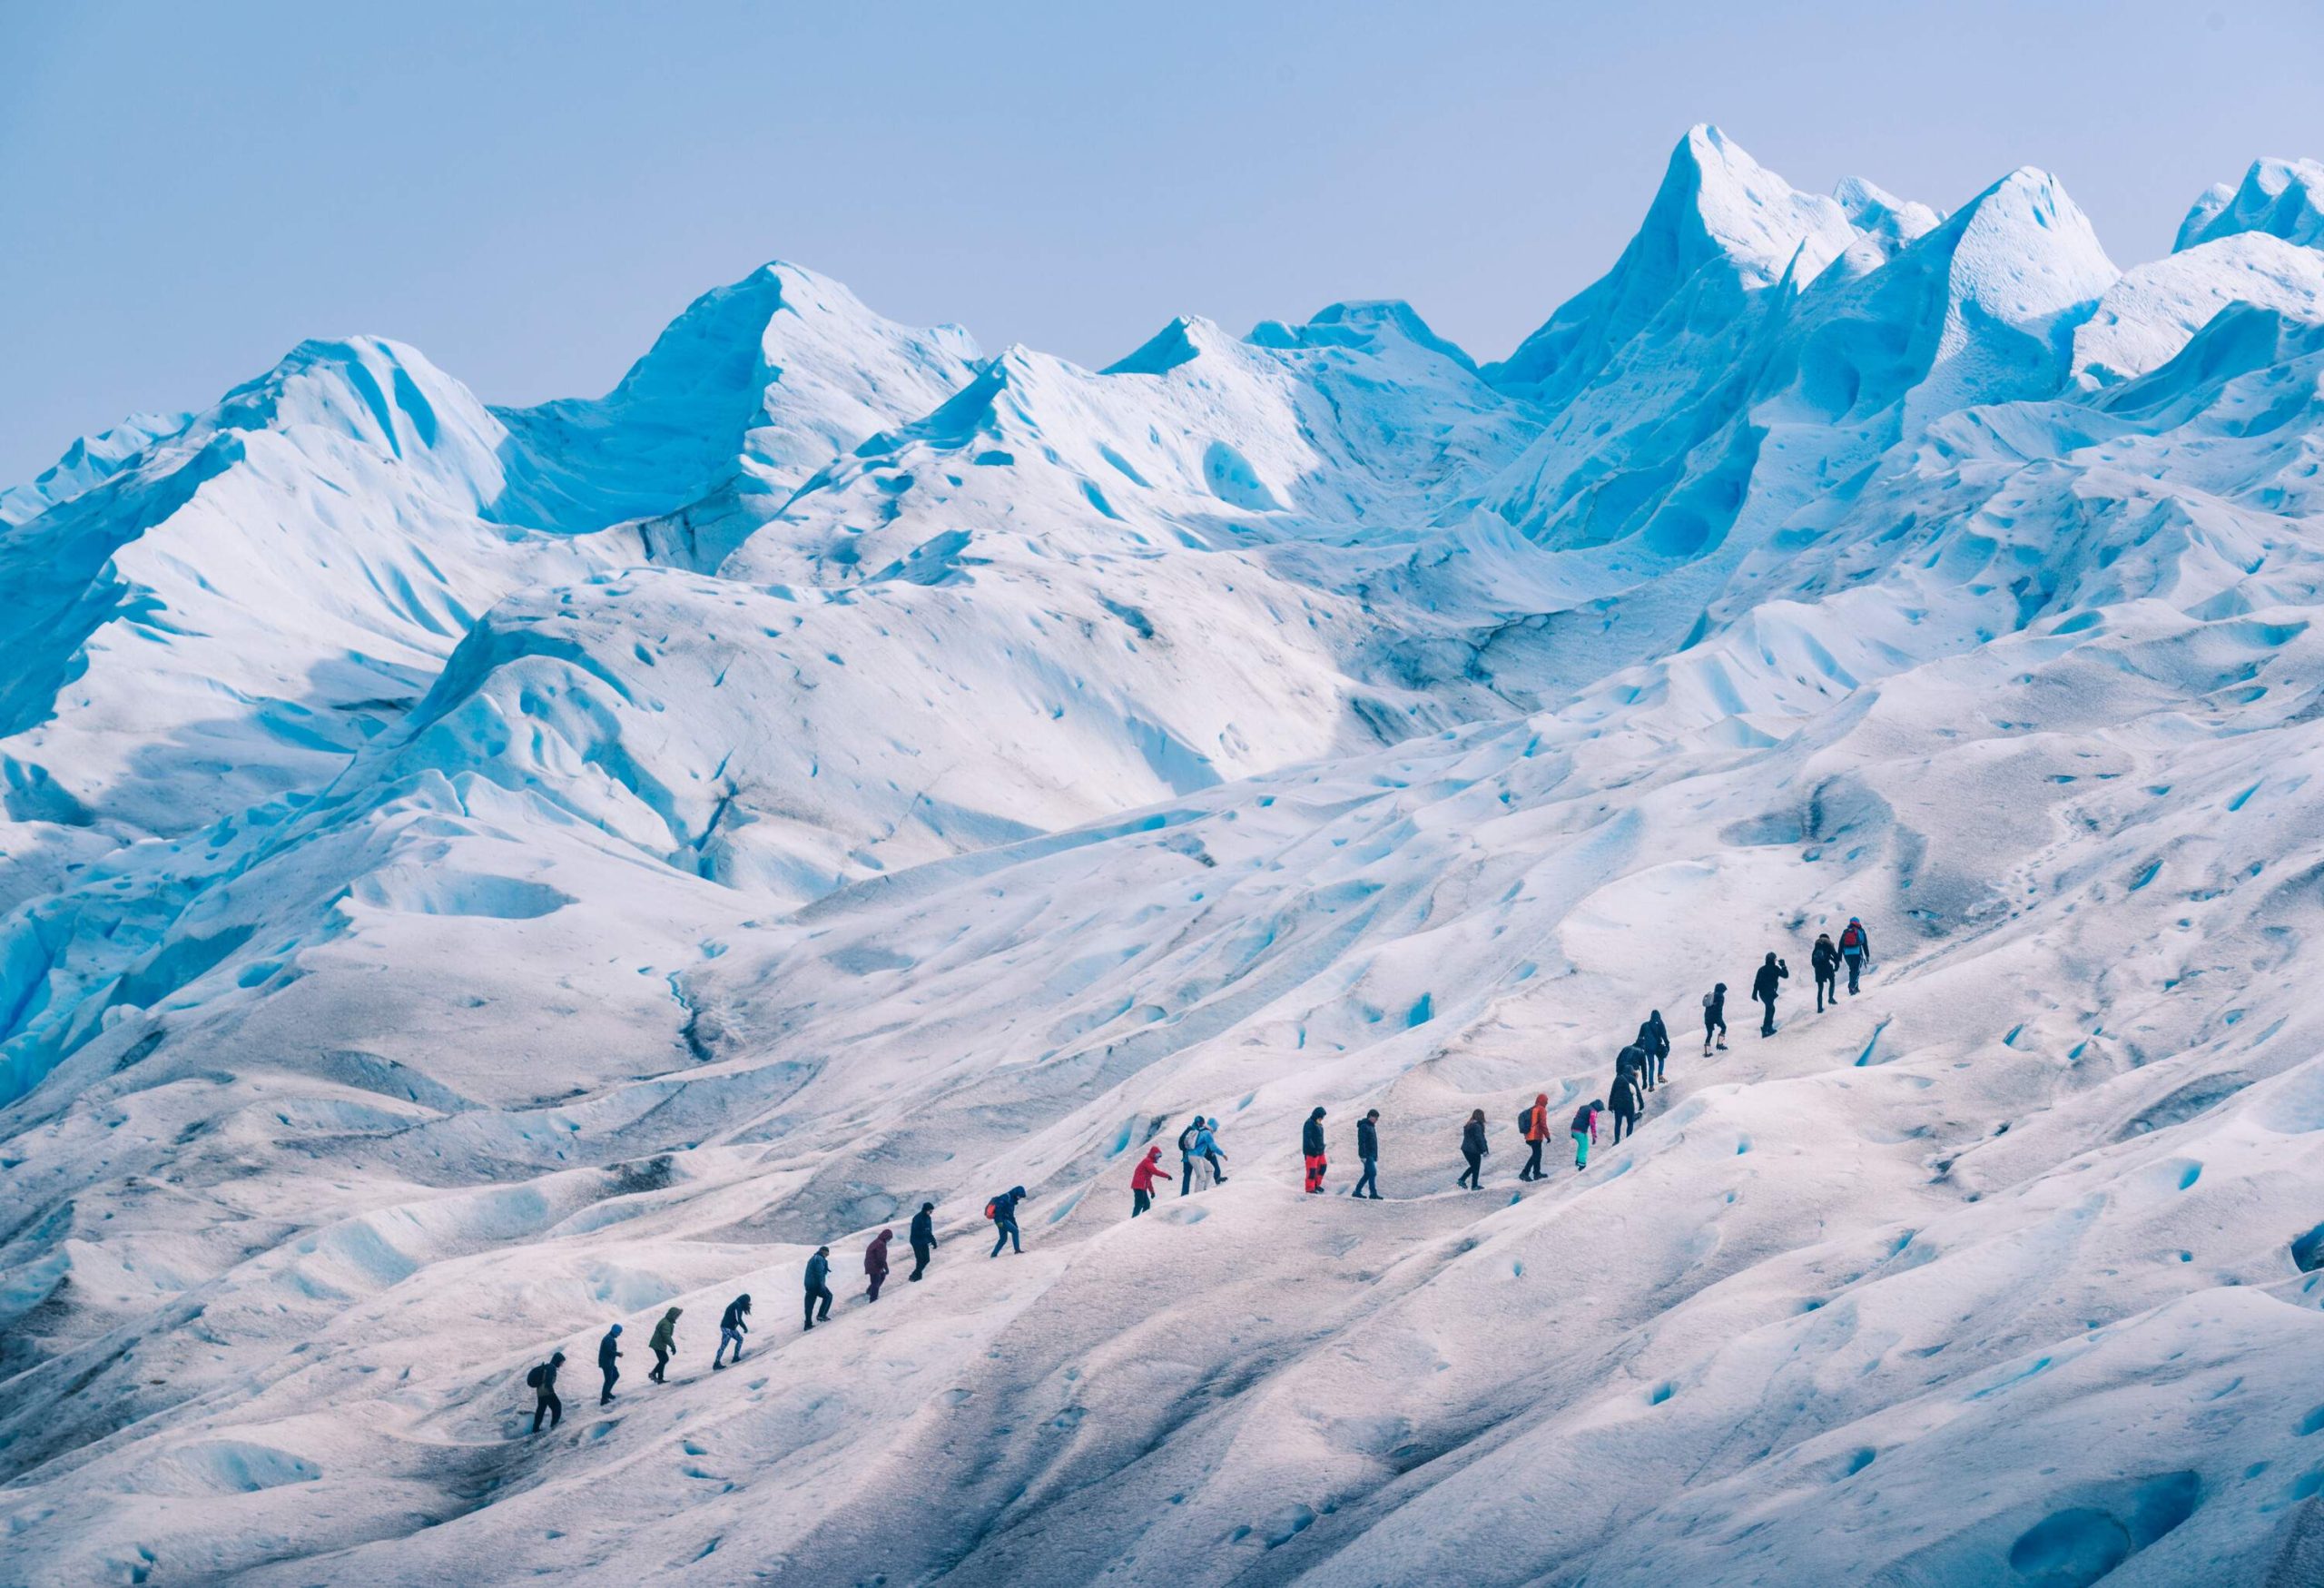 A row of hikers walking on a glacier with jagged peaks.